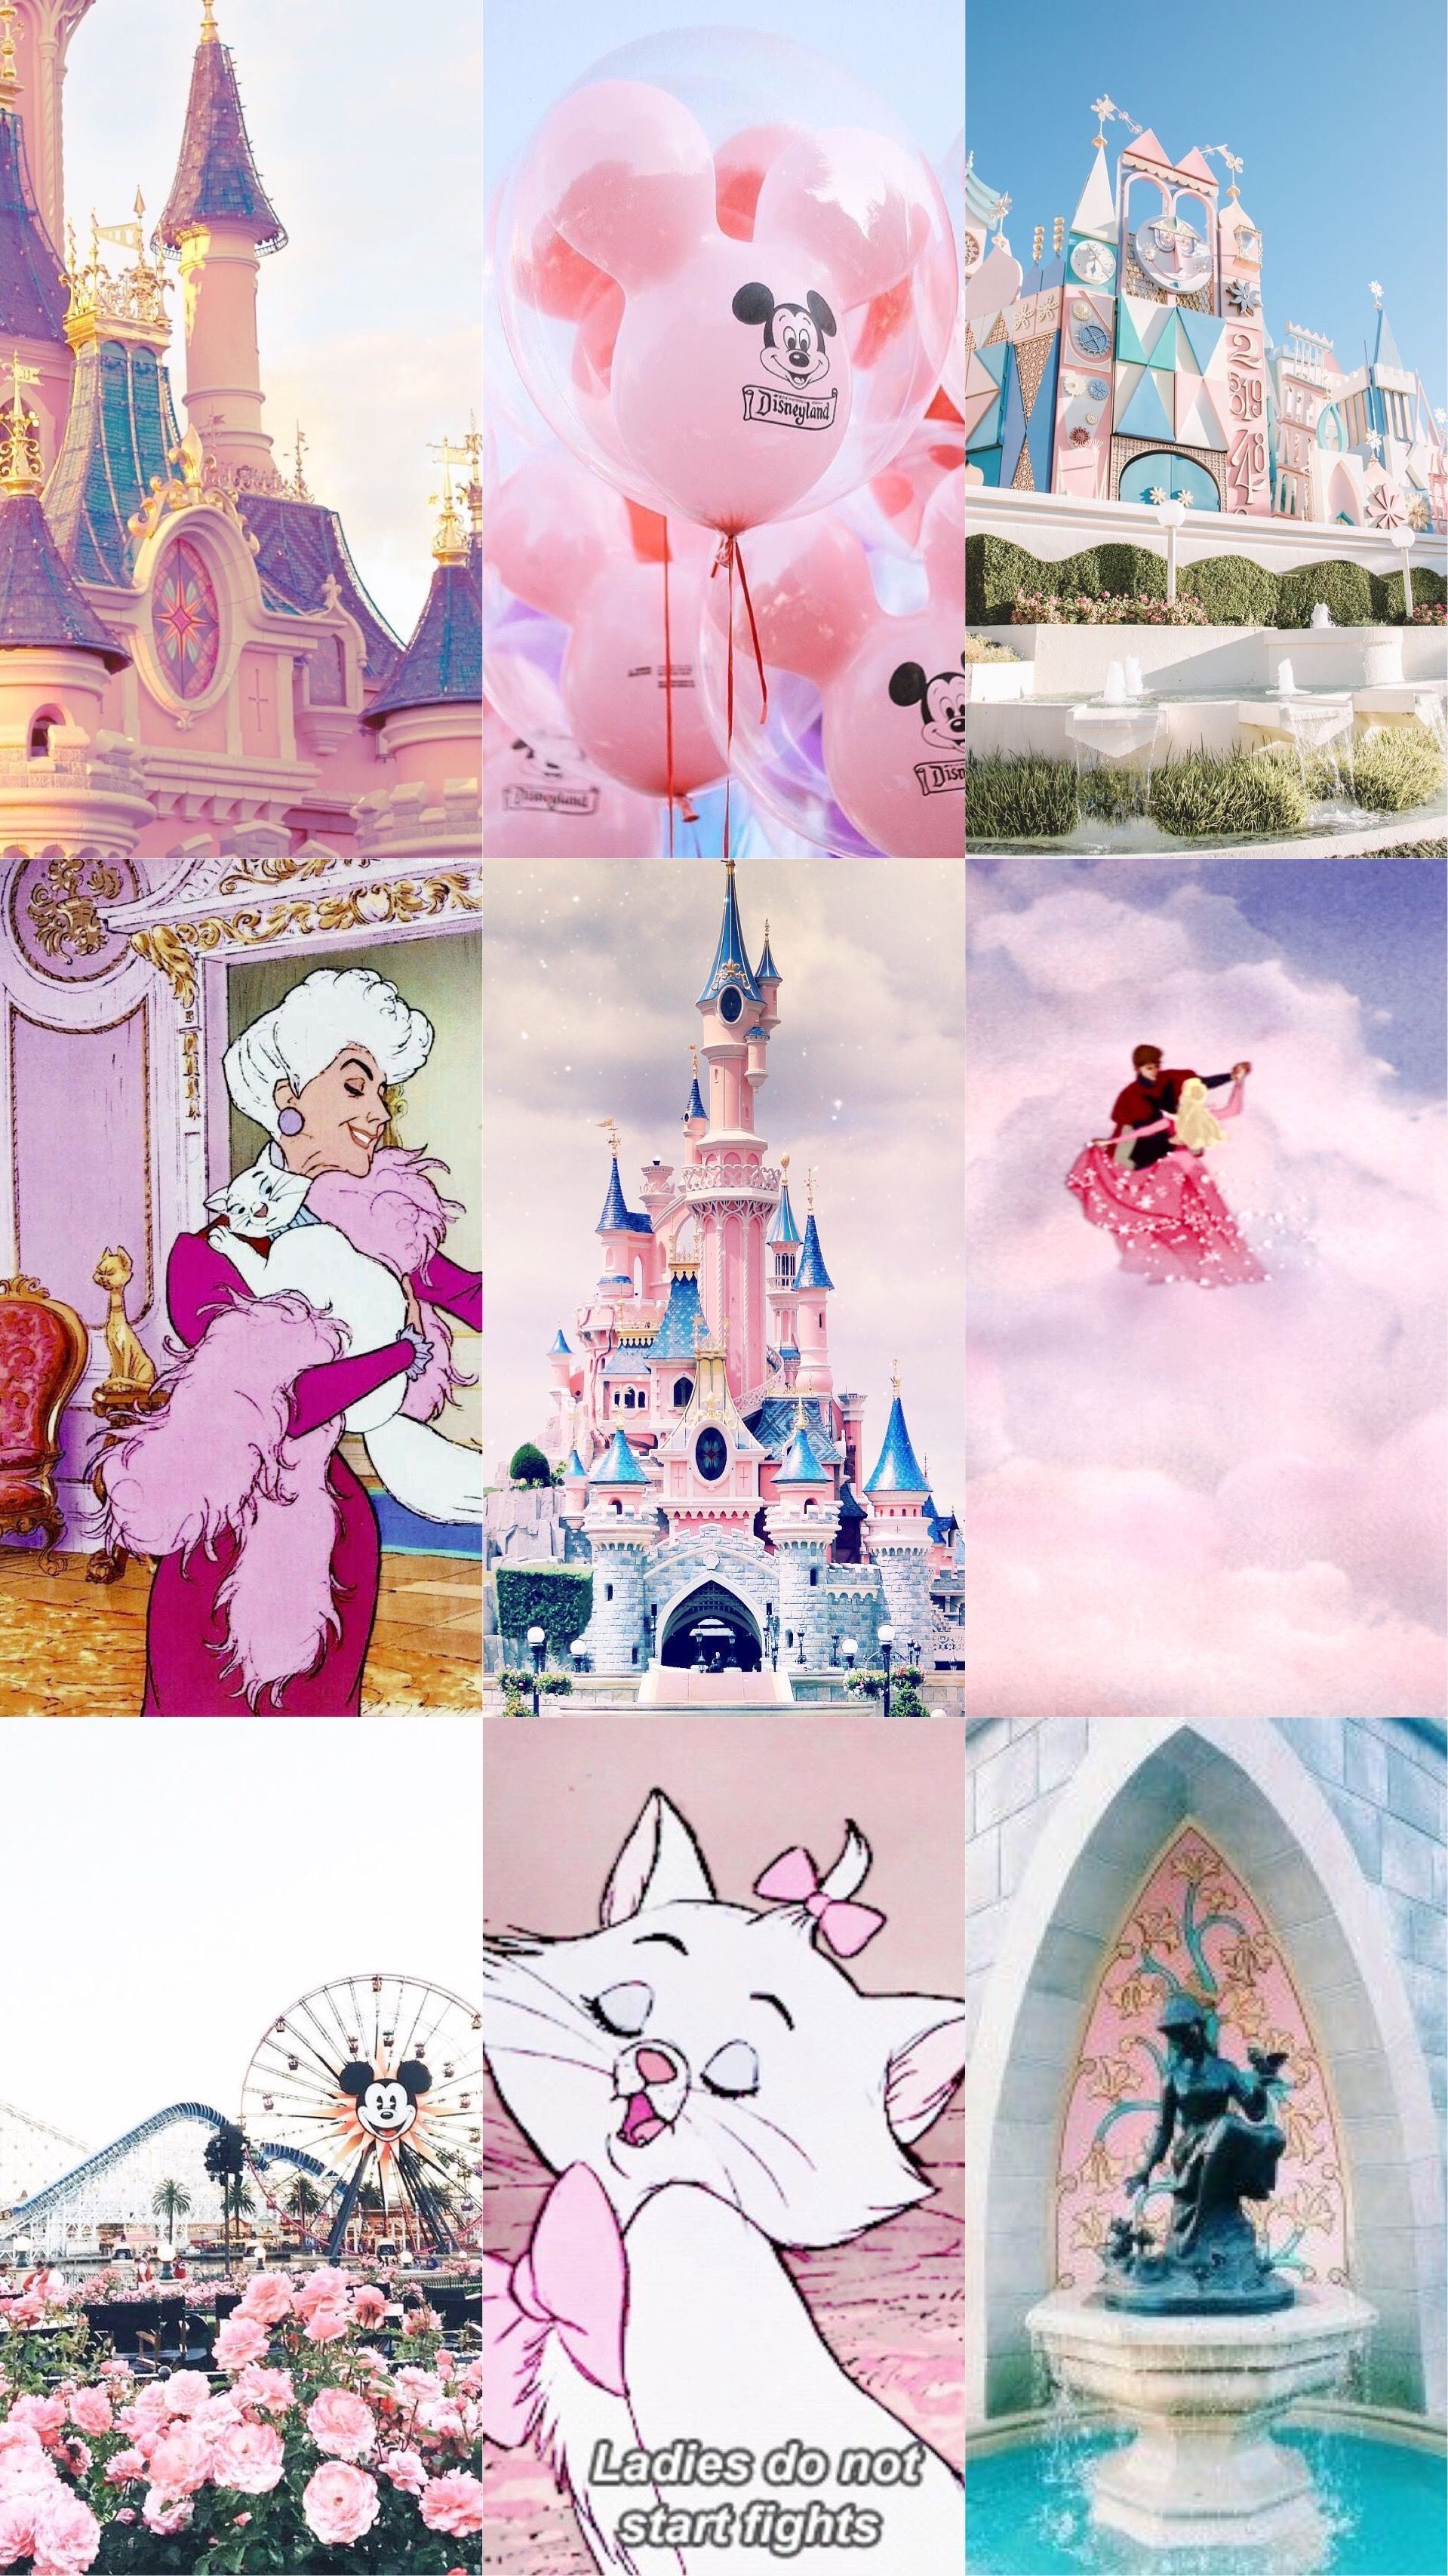 A collage of pictures with different scenes - Disney, princess, Disneyland